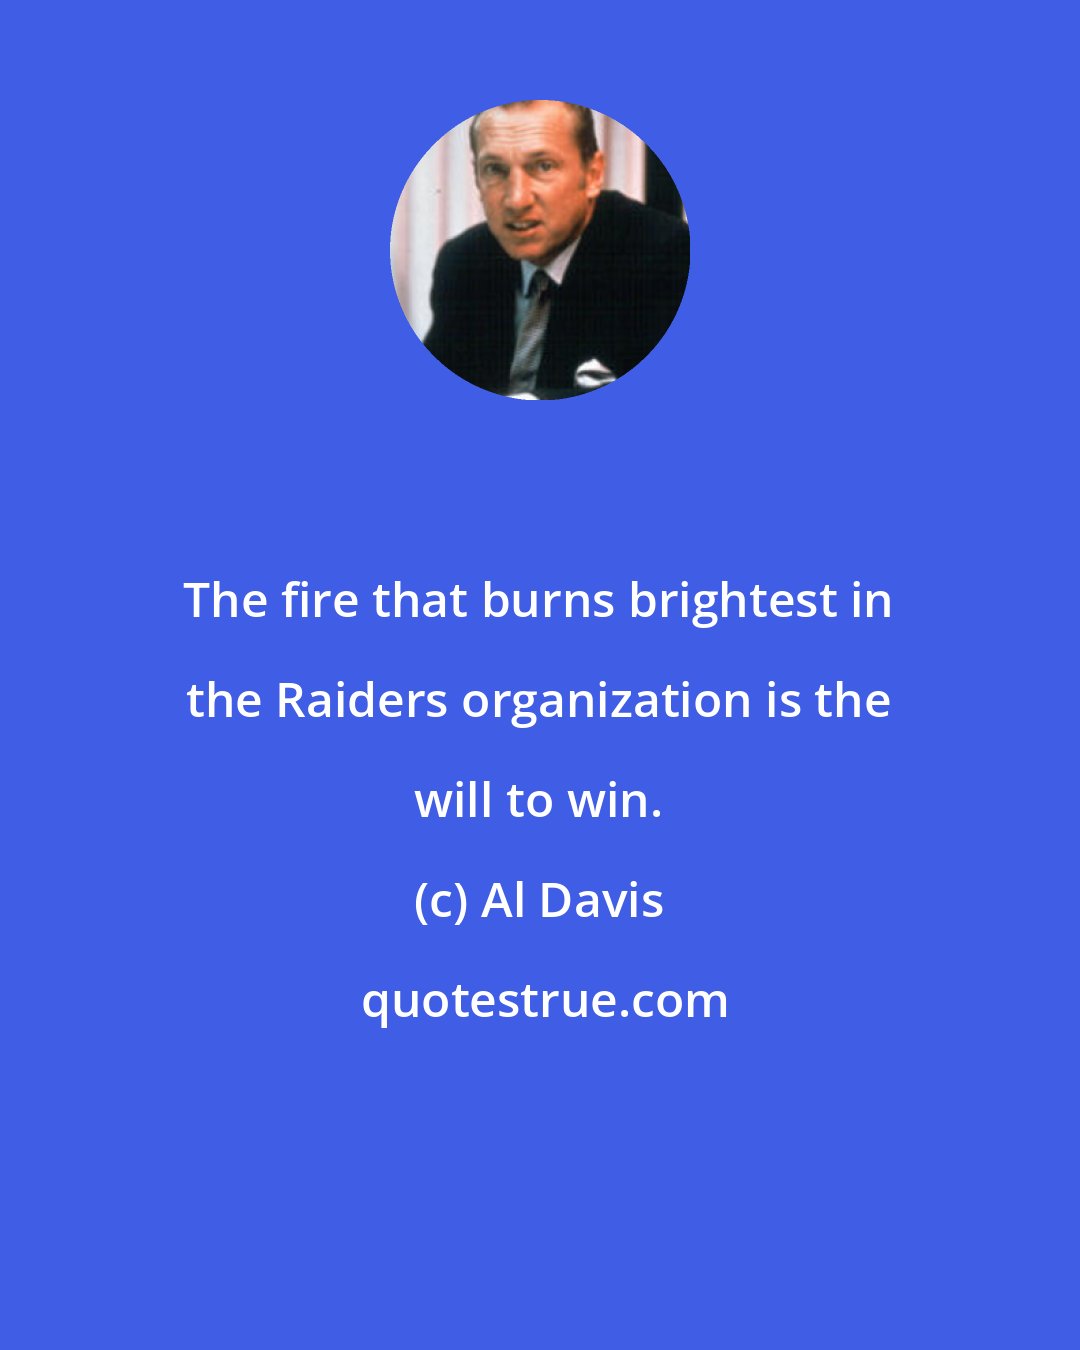 Al Davis: The fire that burns brightest in the Raiders organization is the will to win.